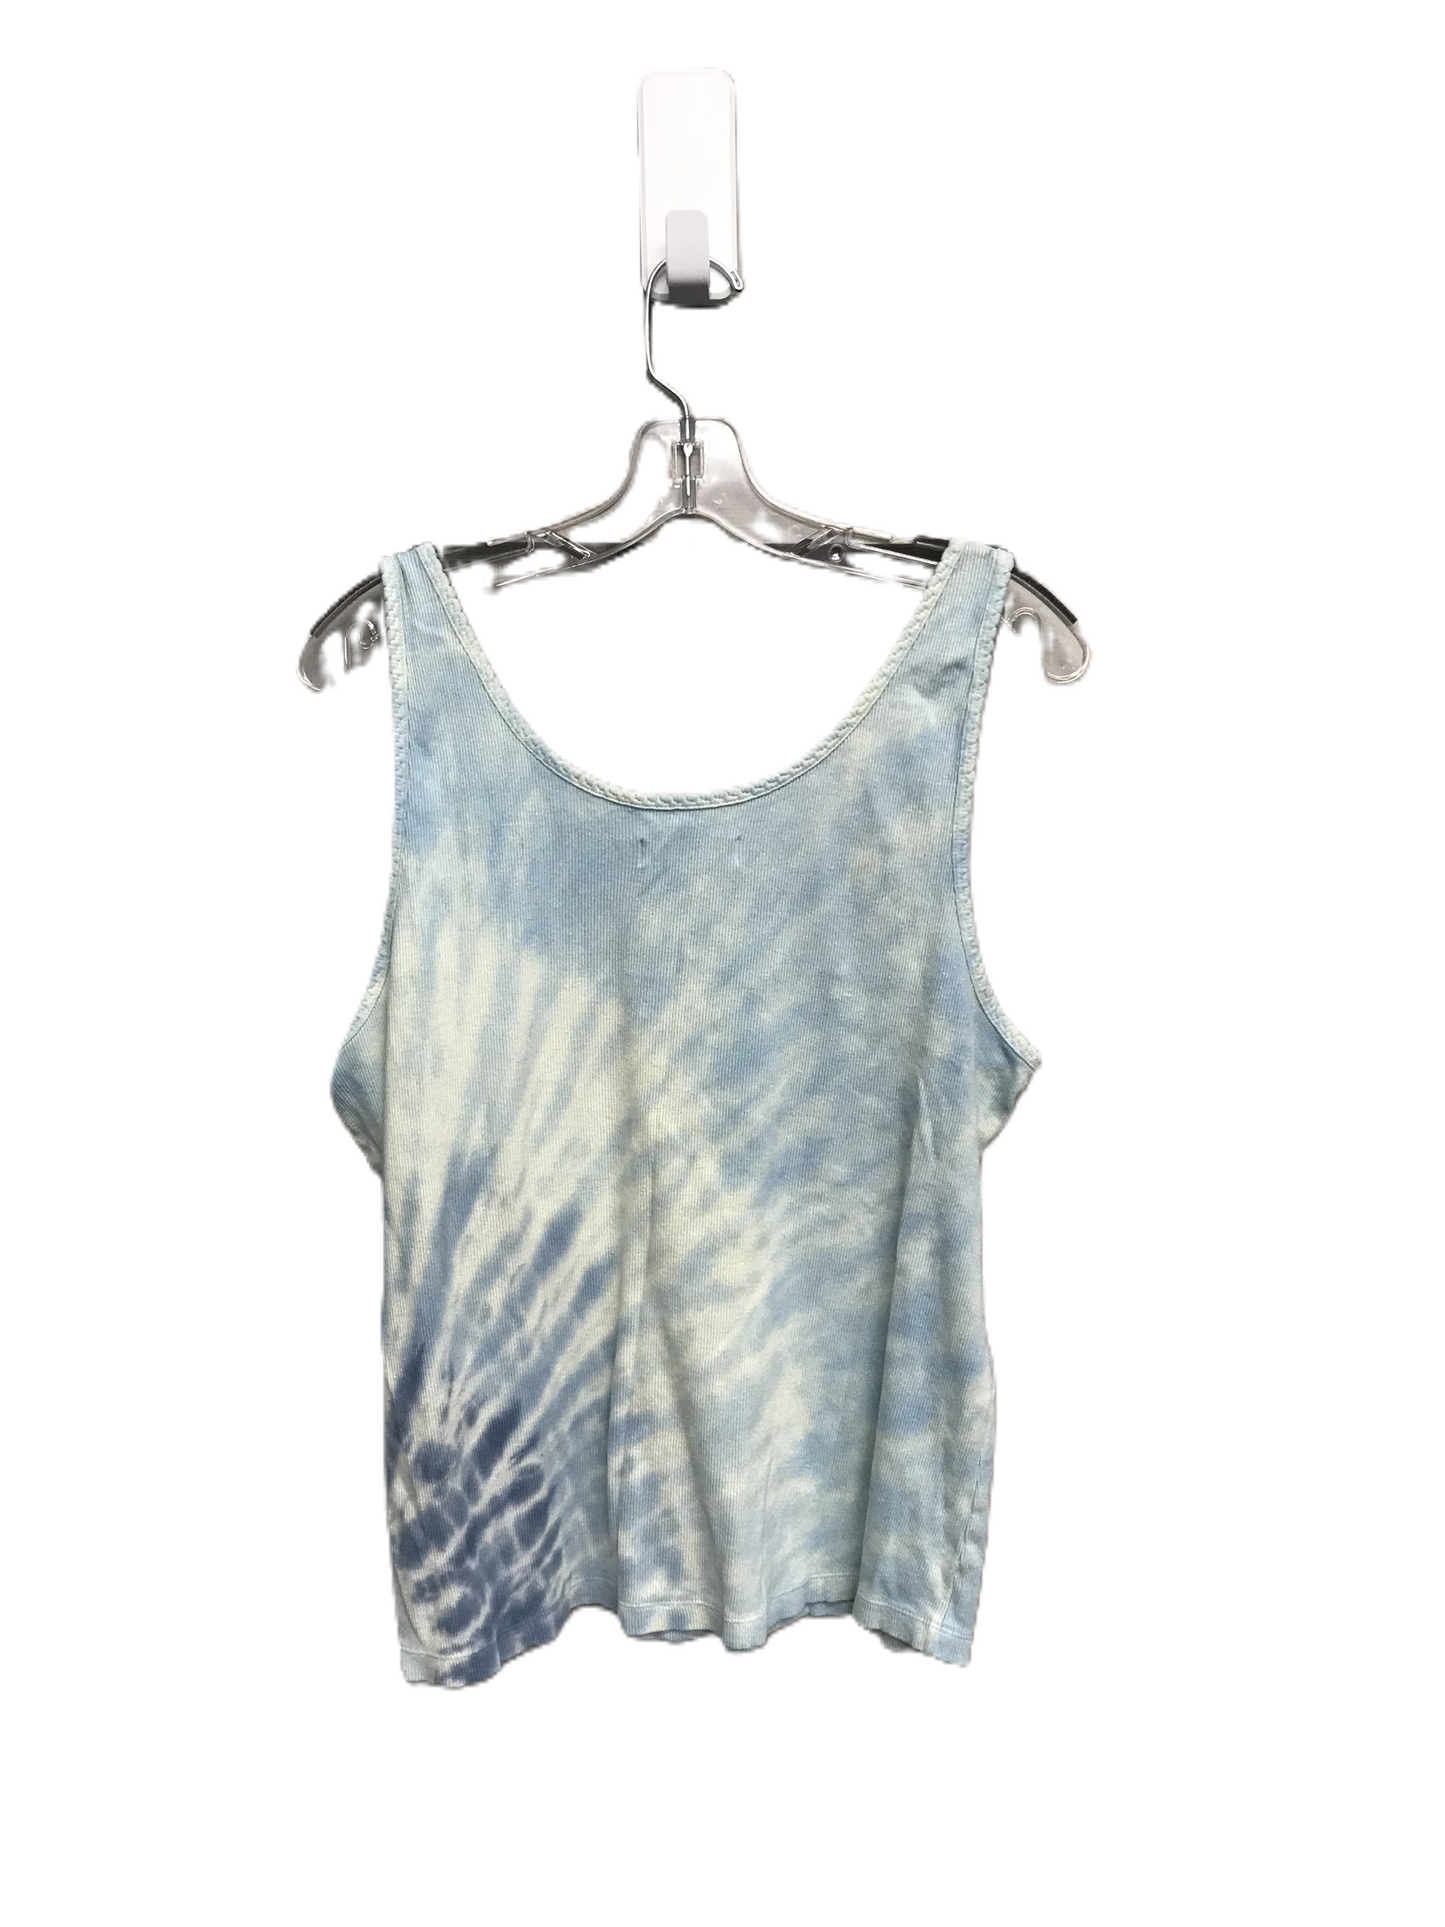 Blue Top Sleeveless By Lucky Brand, Size: 1x